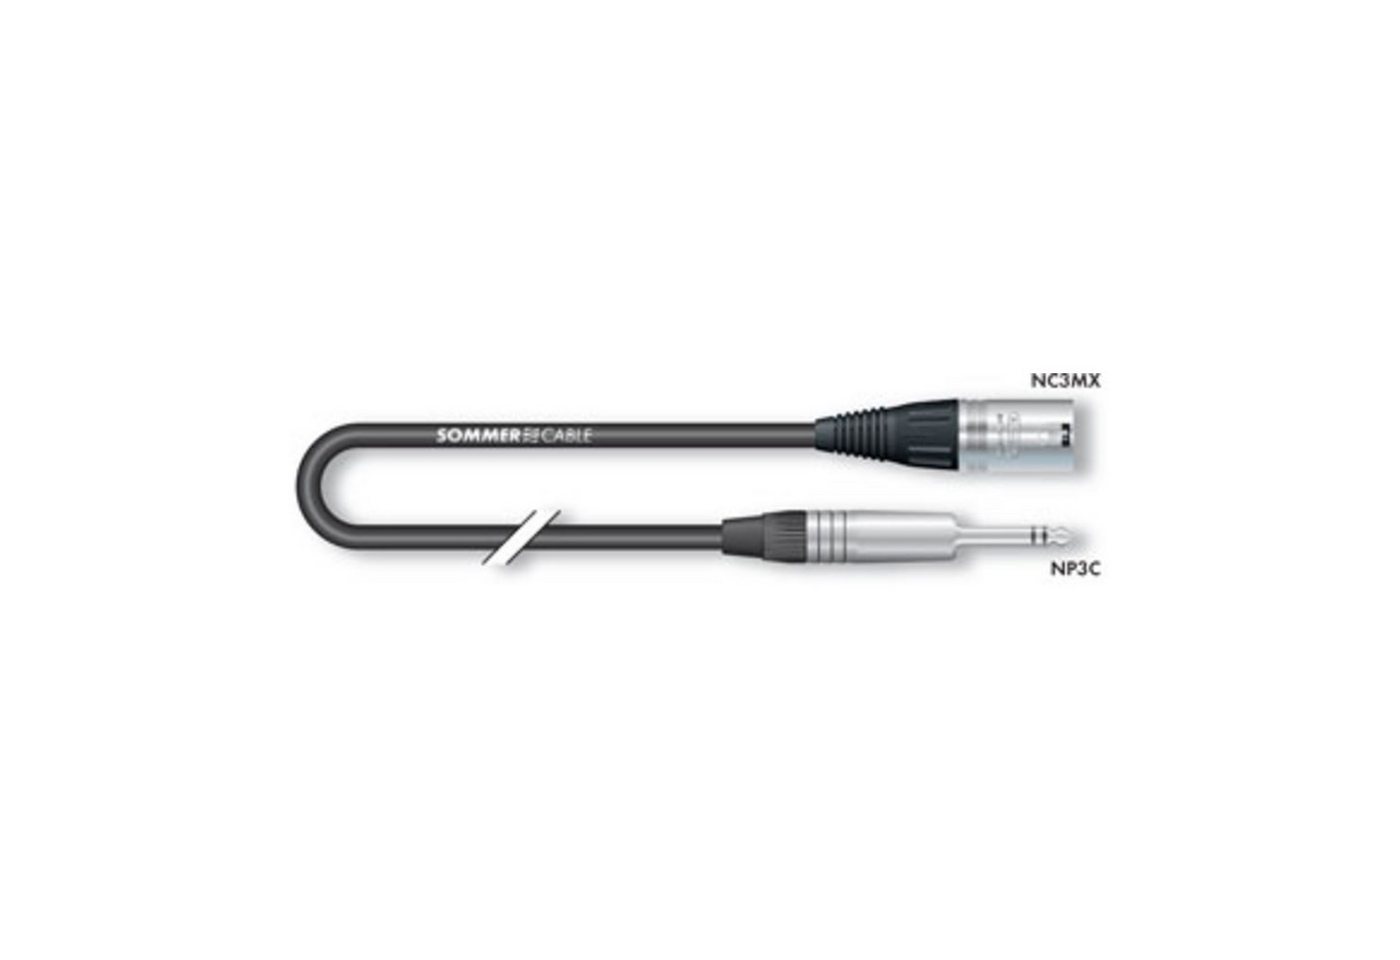 Sommer Cable Audio-Kabel, SG04-1500-SW Stage 22 Mikrofonkabel 15 m - Mikrofonkabel von Sommer Cable